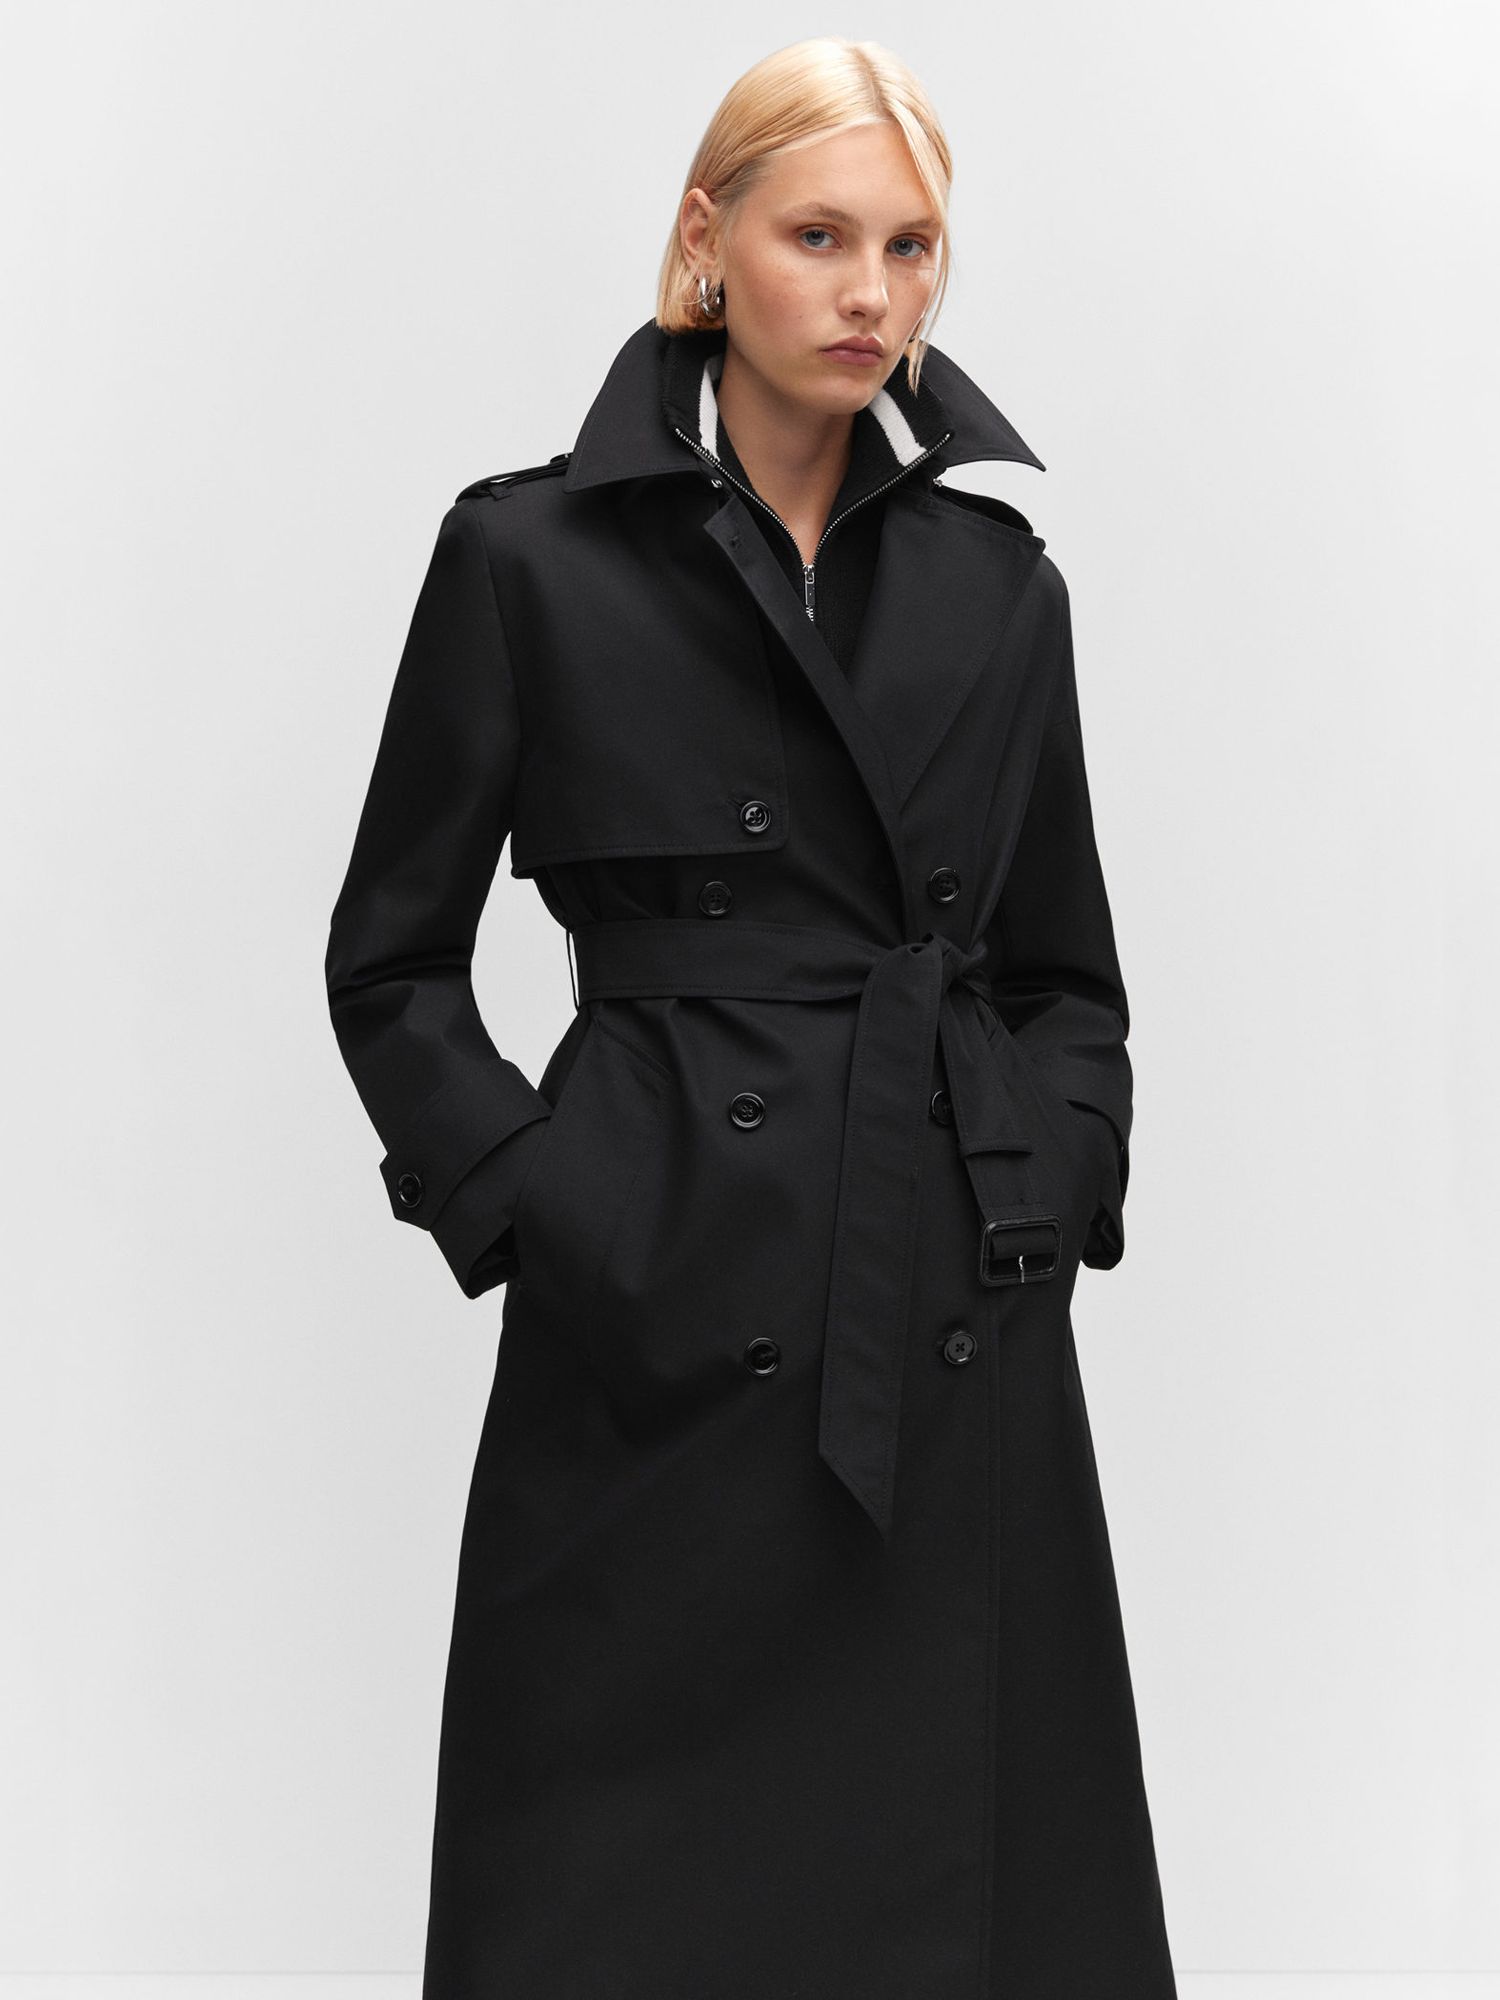 Mango Chicago Waterproof Double Breasted Trench Coat, Black